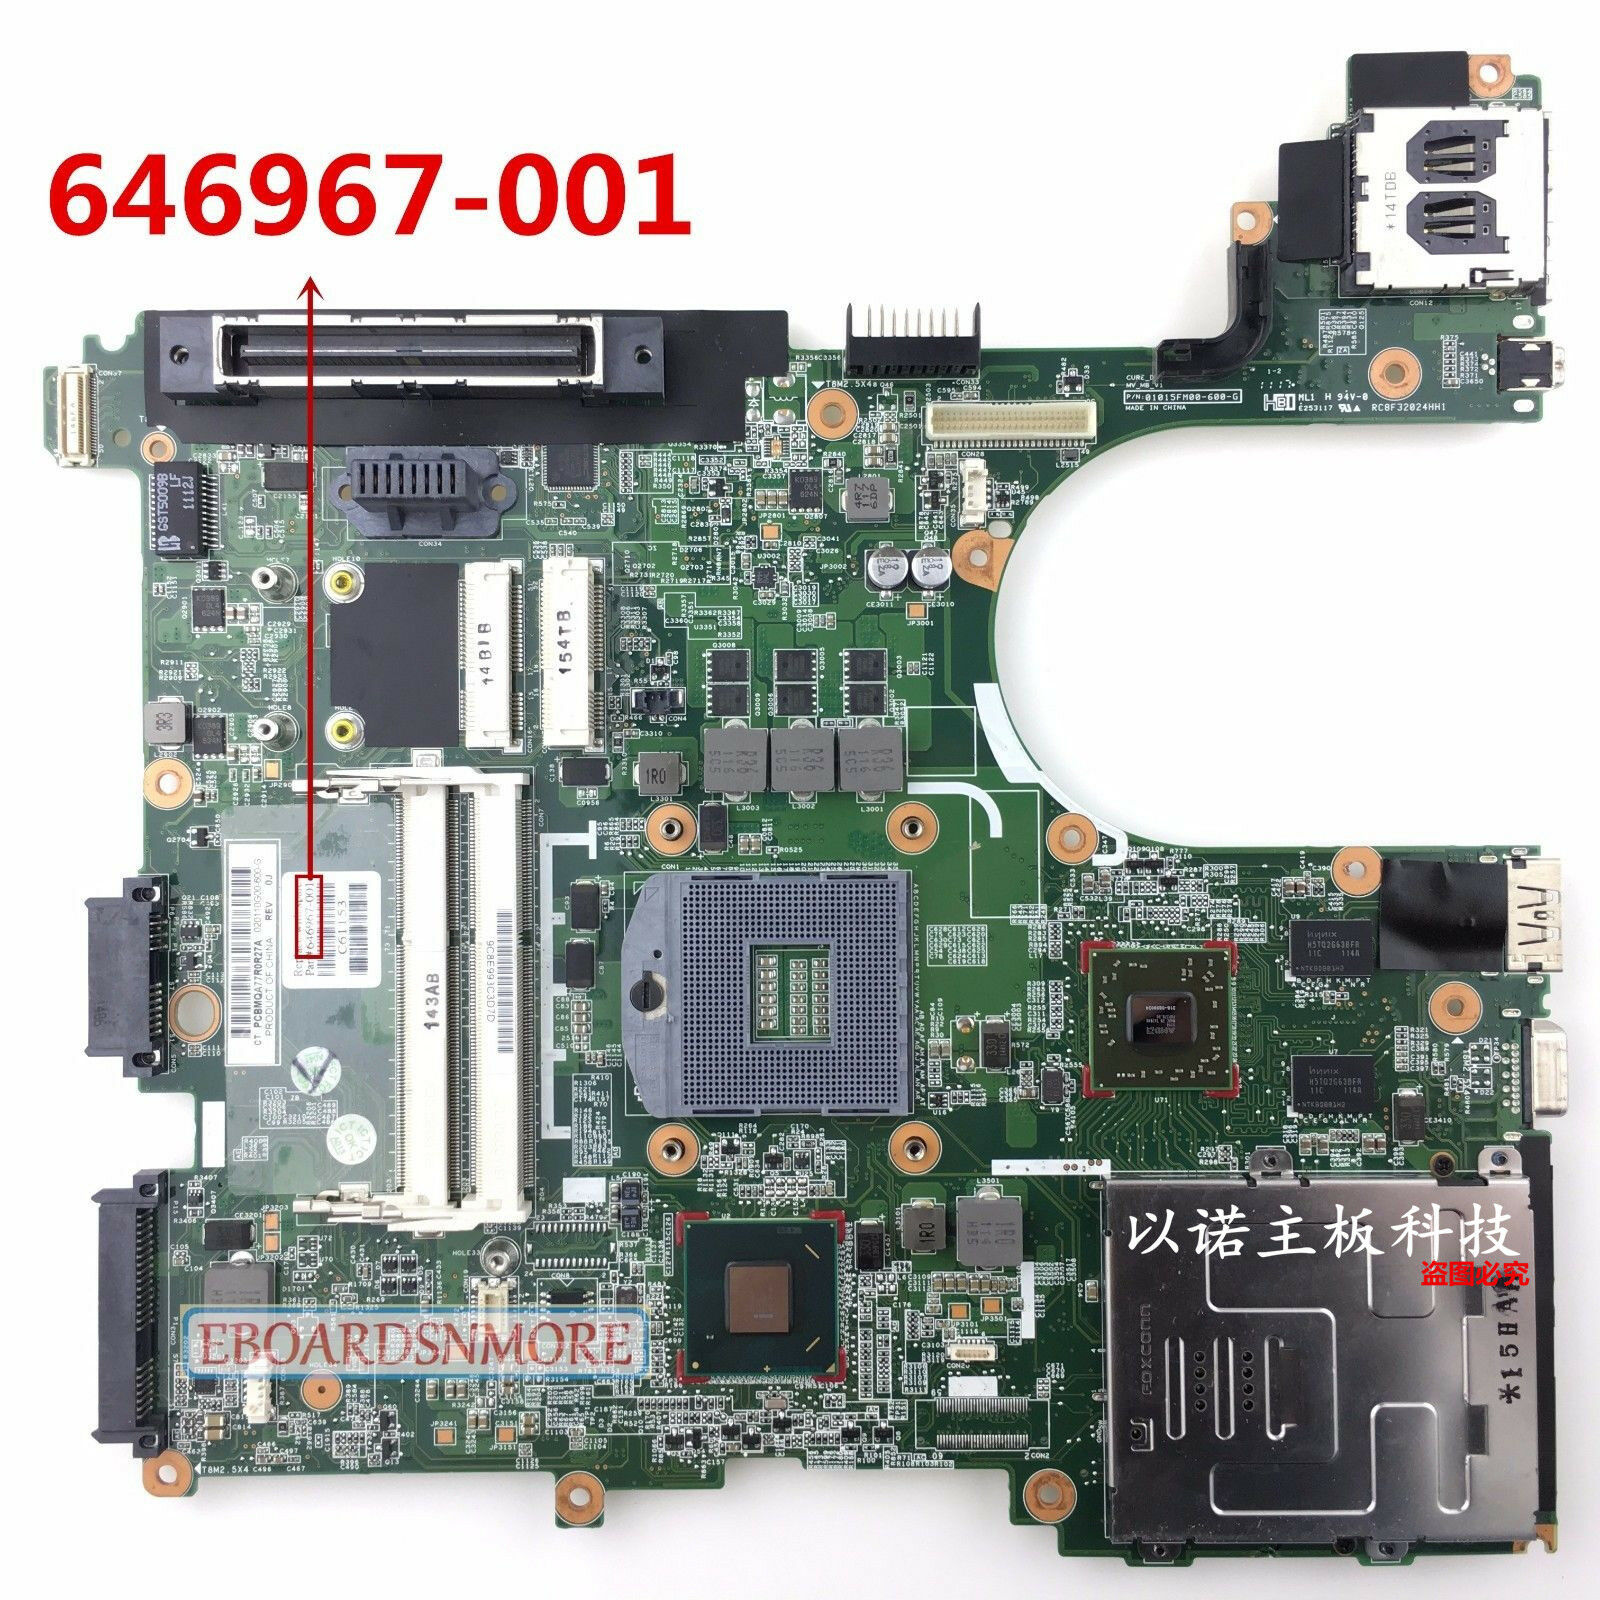 646967-001 for HP 6560B 8560P intel QM67 laptop Motherboard,AMD graphics,Grade A Compatible CPU Brand: Inte